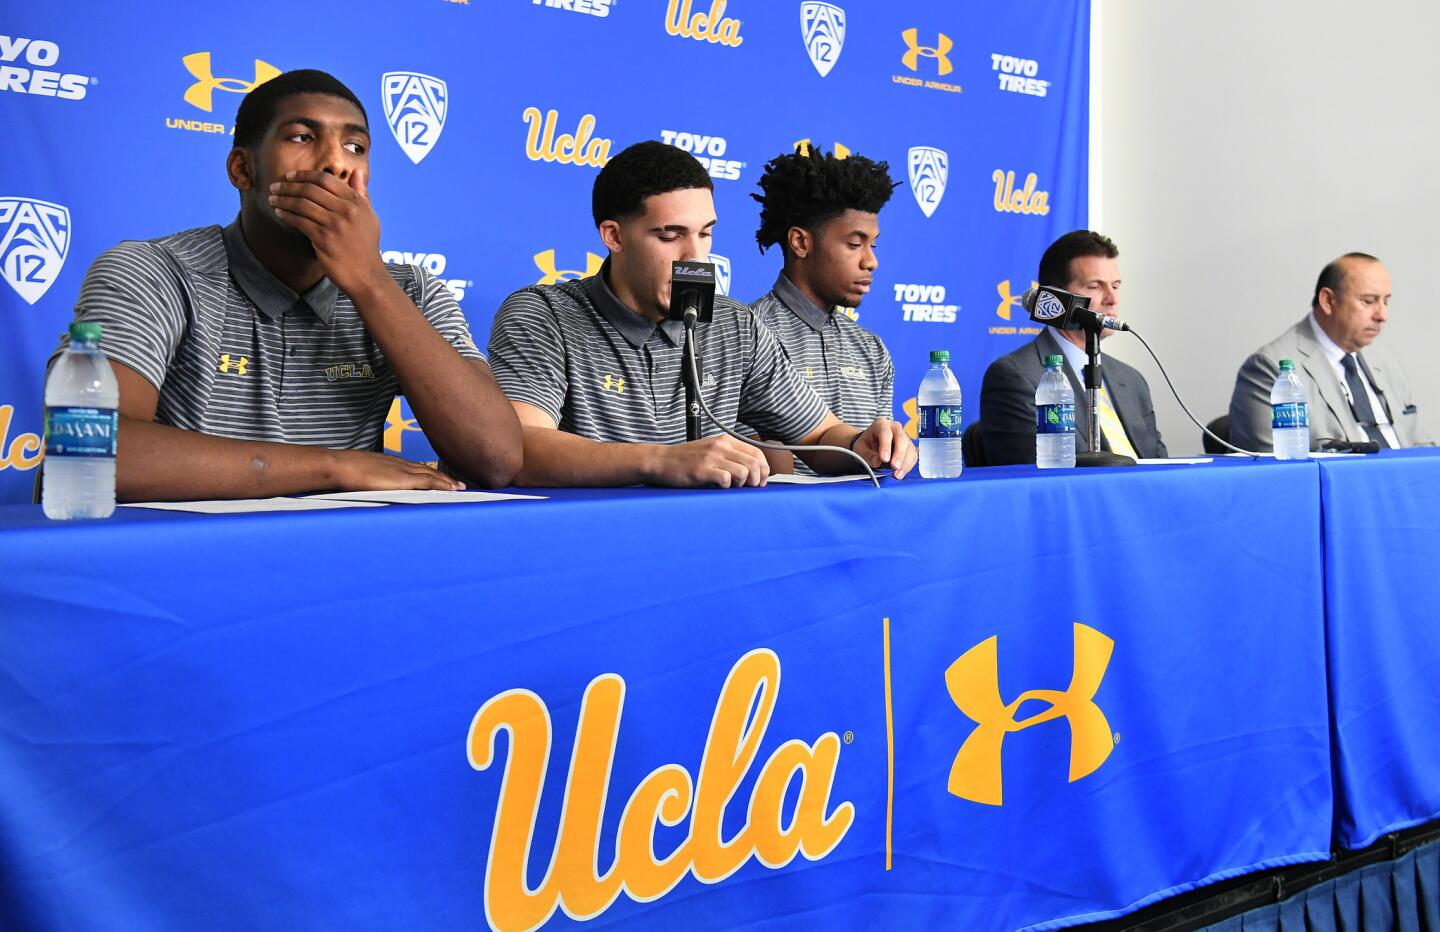 UCLA basketball players, from left, Cody Riley, LiAngelo Ball and Jalen Hill give statements at Pauley Pavilion about the events in China during a press conference Wednesday.